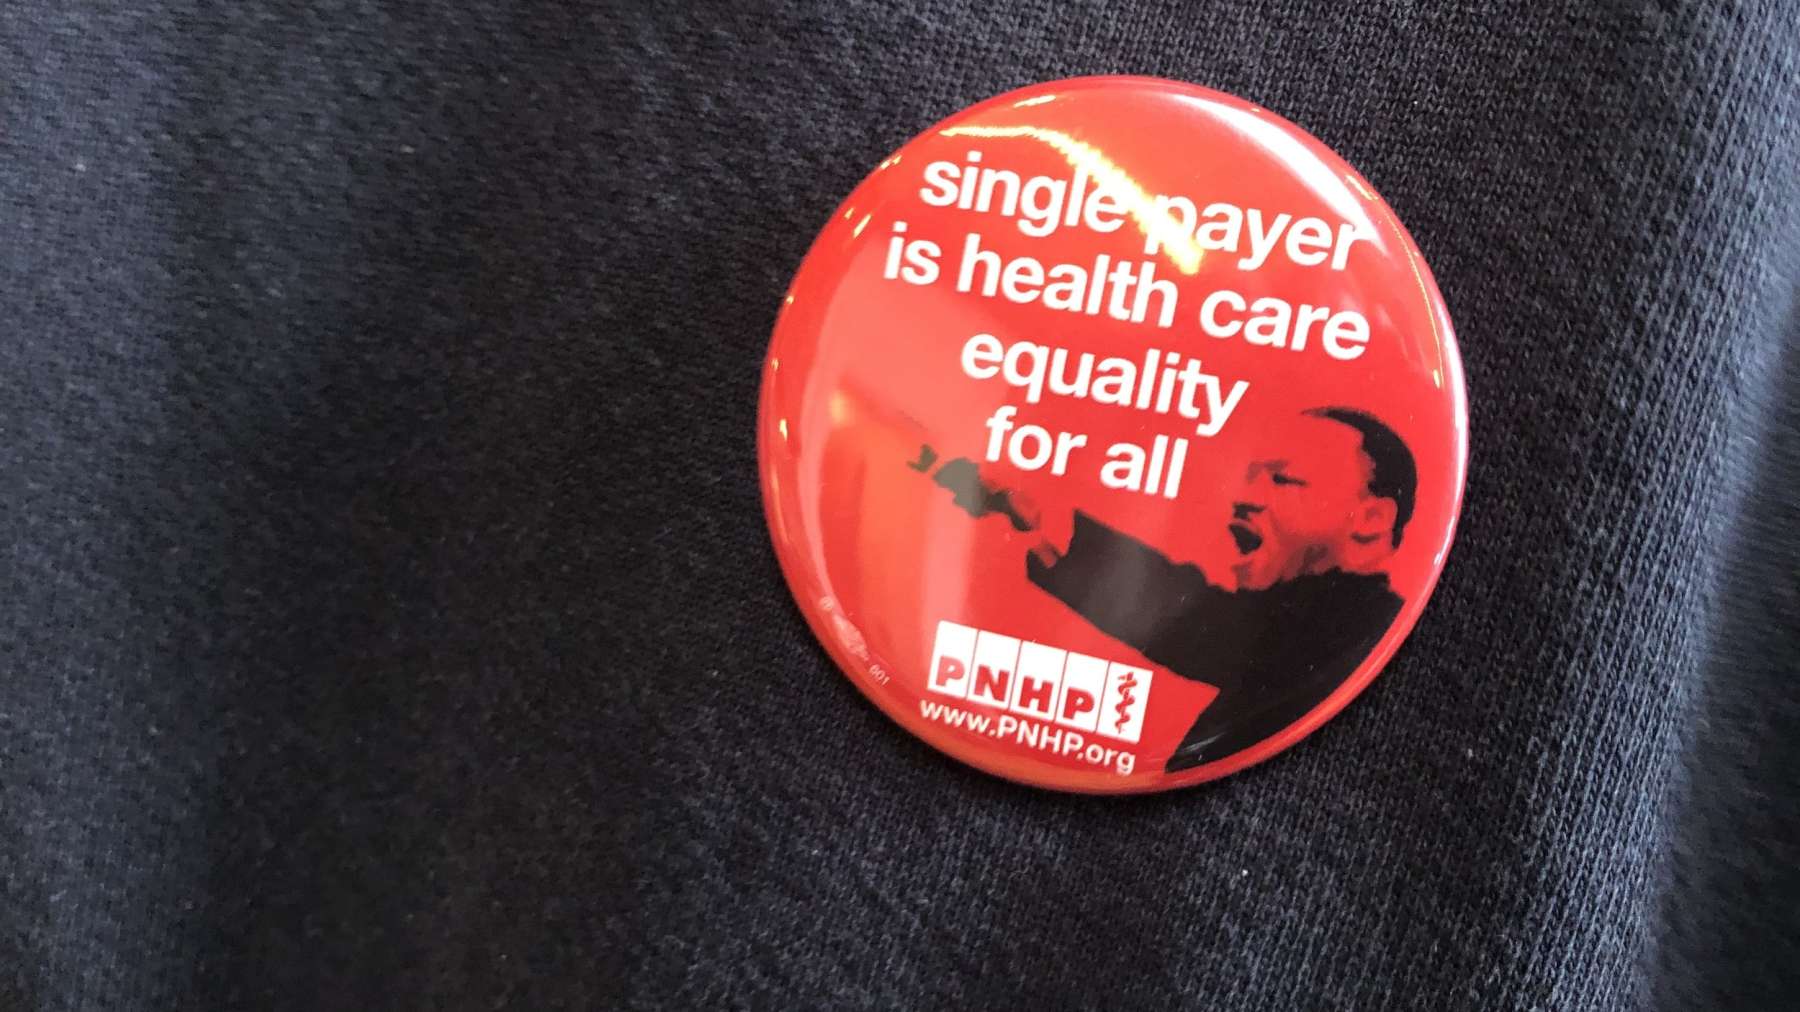 The path to Medicare-for-All is through Rhode Island say advocates